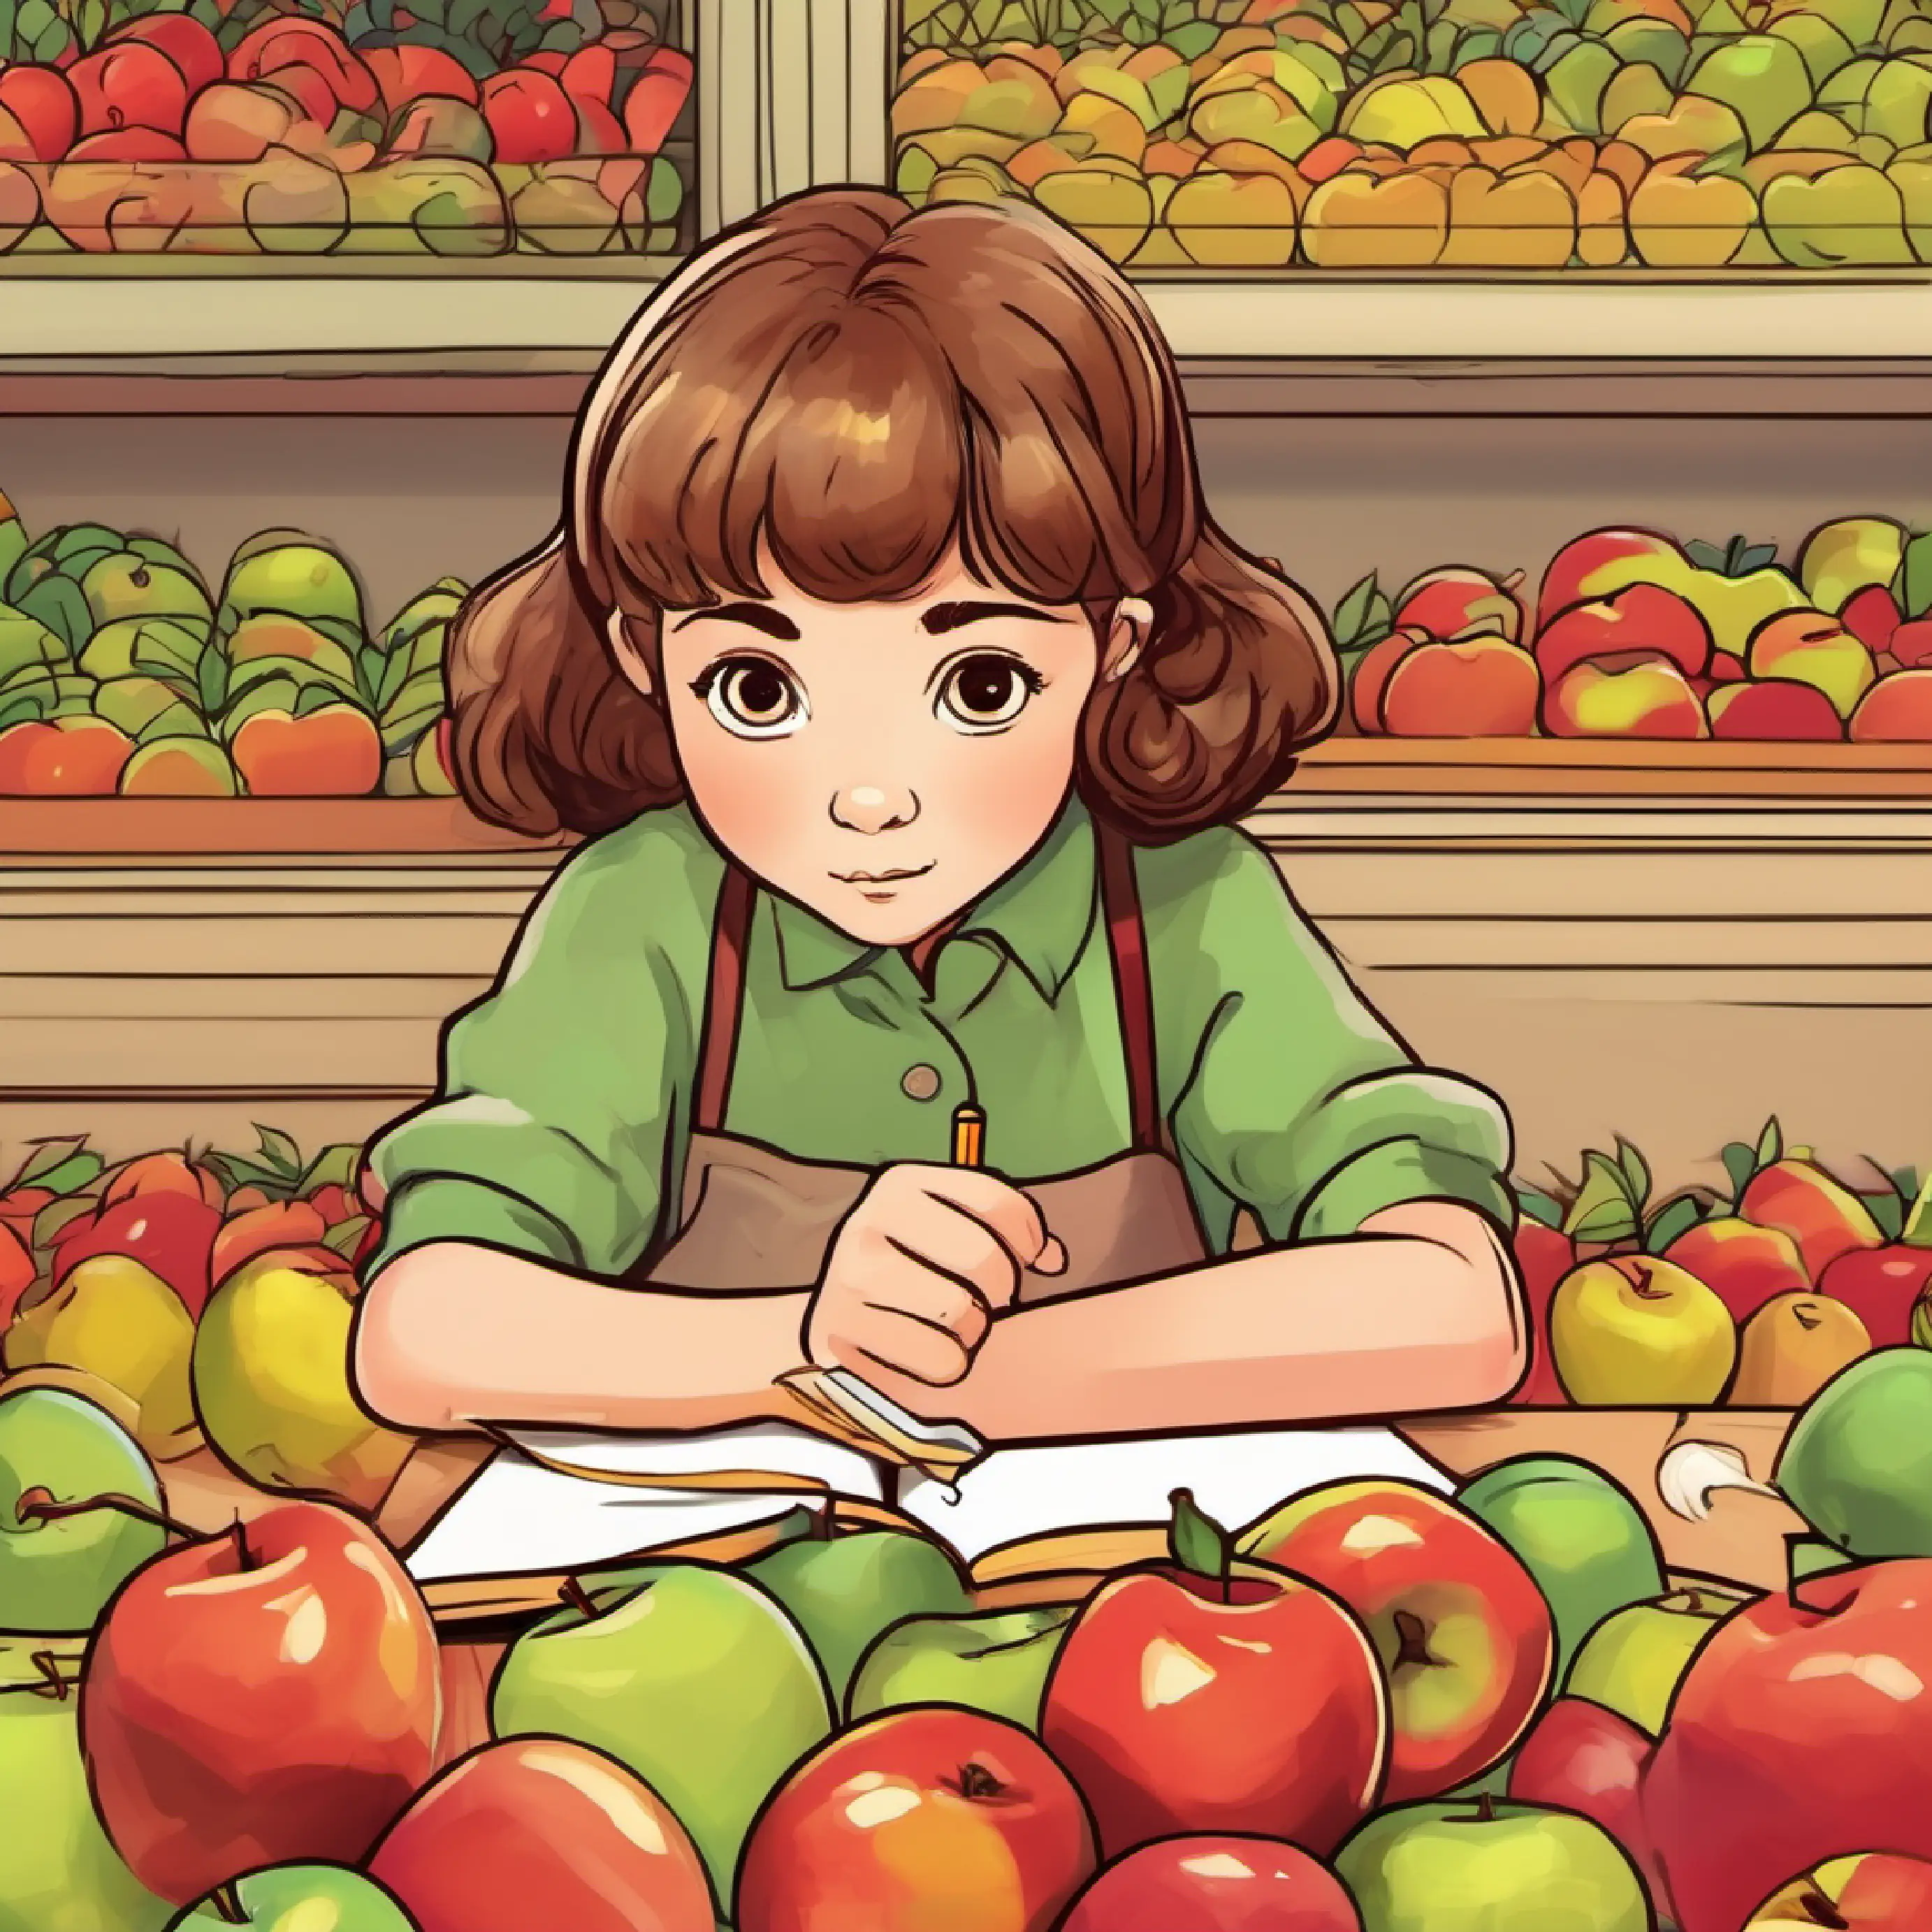 Curious girl with brown hair and hazel eyes counting apples successfully